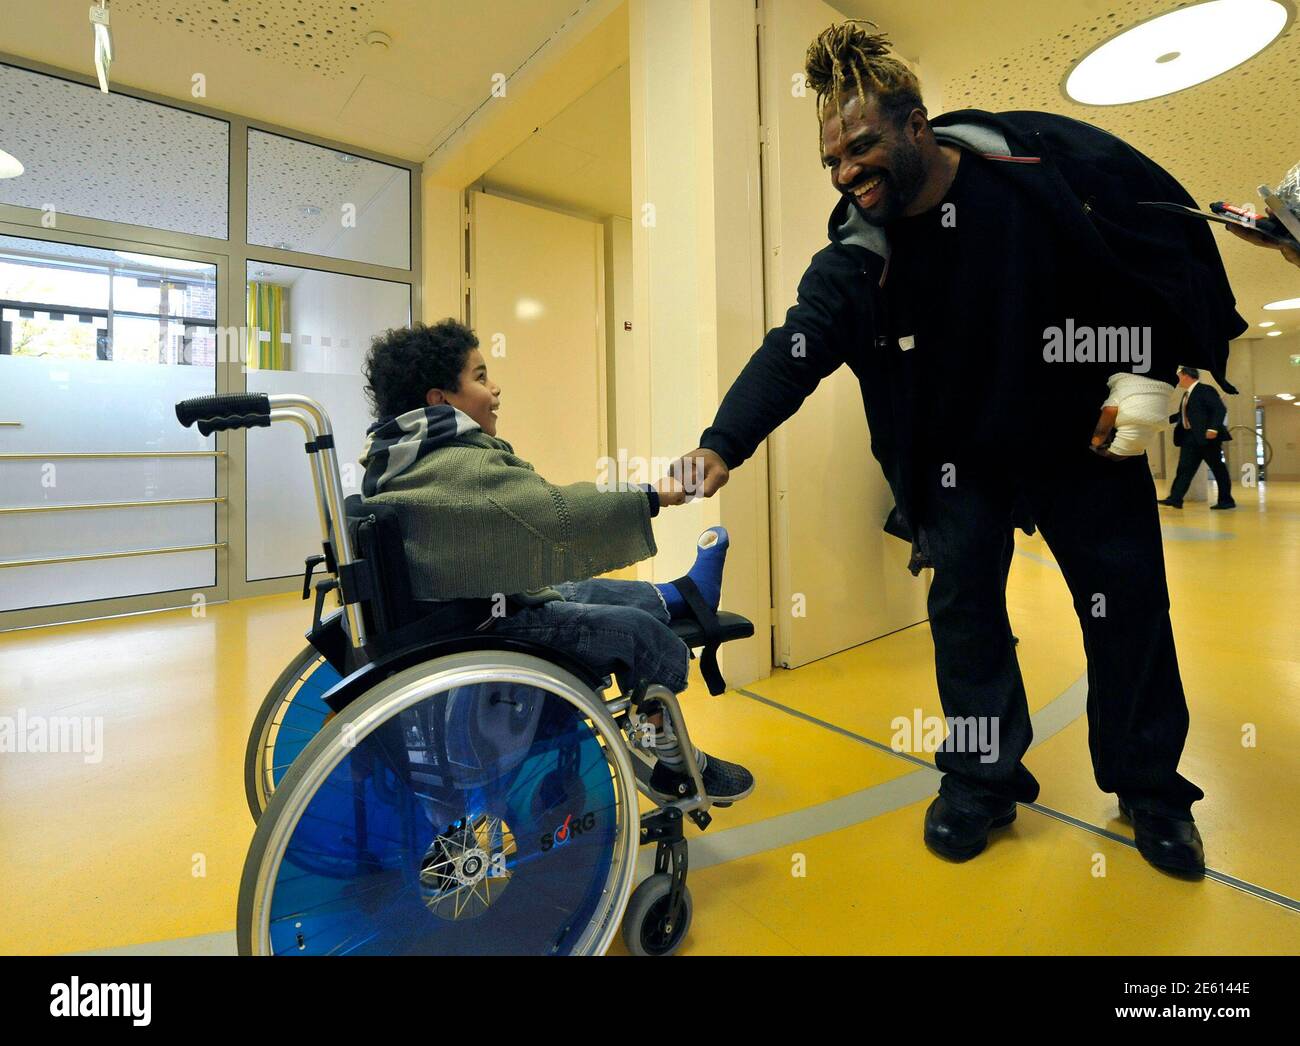 U.S. boxer Shannon Briggs greets young boy Terry during a visit to the 'Allgemeines Kinderkrankenhaus Altona ' (Childrens Hospital Altona - AKK) in the northern German city of Hamburg October 26, 2010.  REUTERS/Morris Mac Matzen (GERMANY - Tags: SPORT BOXING SOCIETY HEALTH IMAGES OF THE DAY) Stock Photo